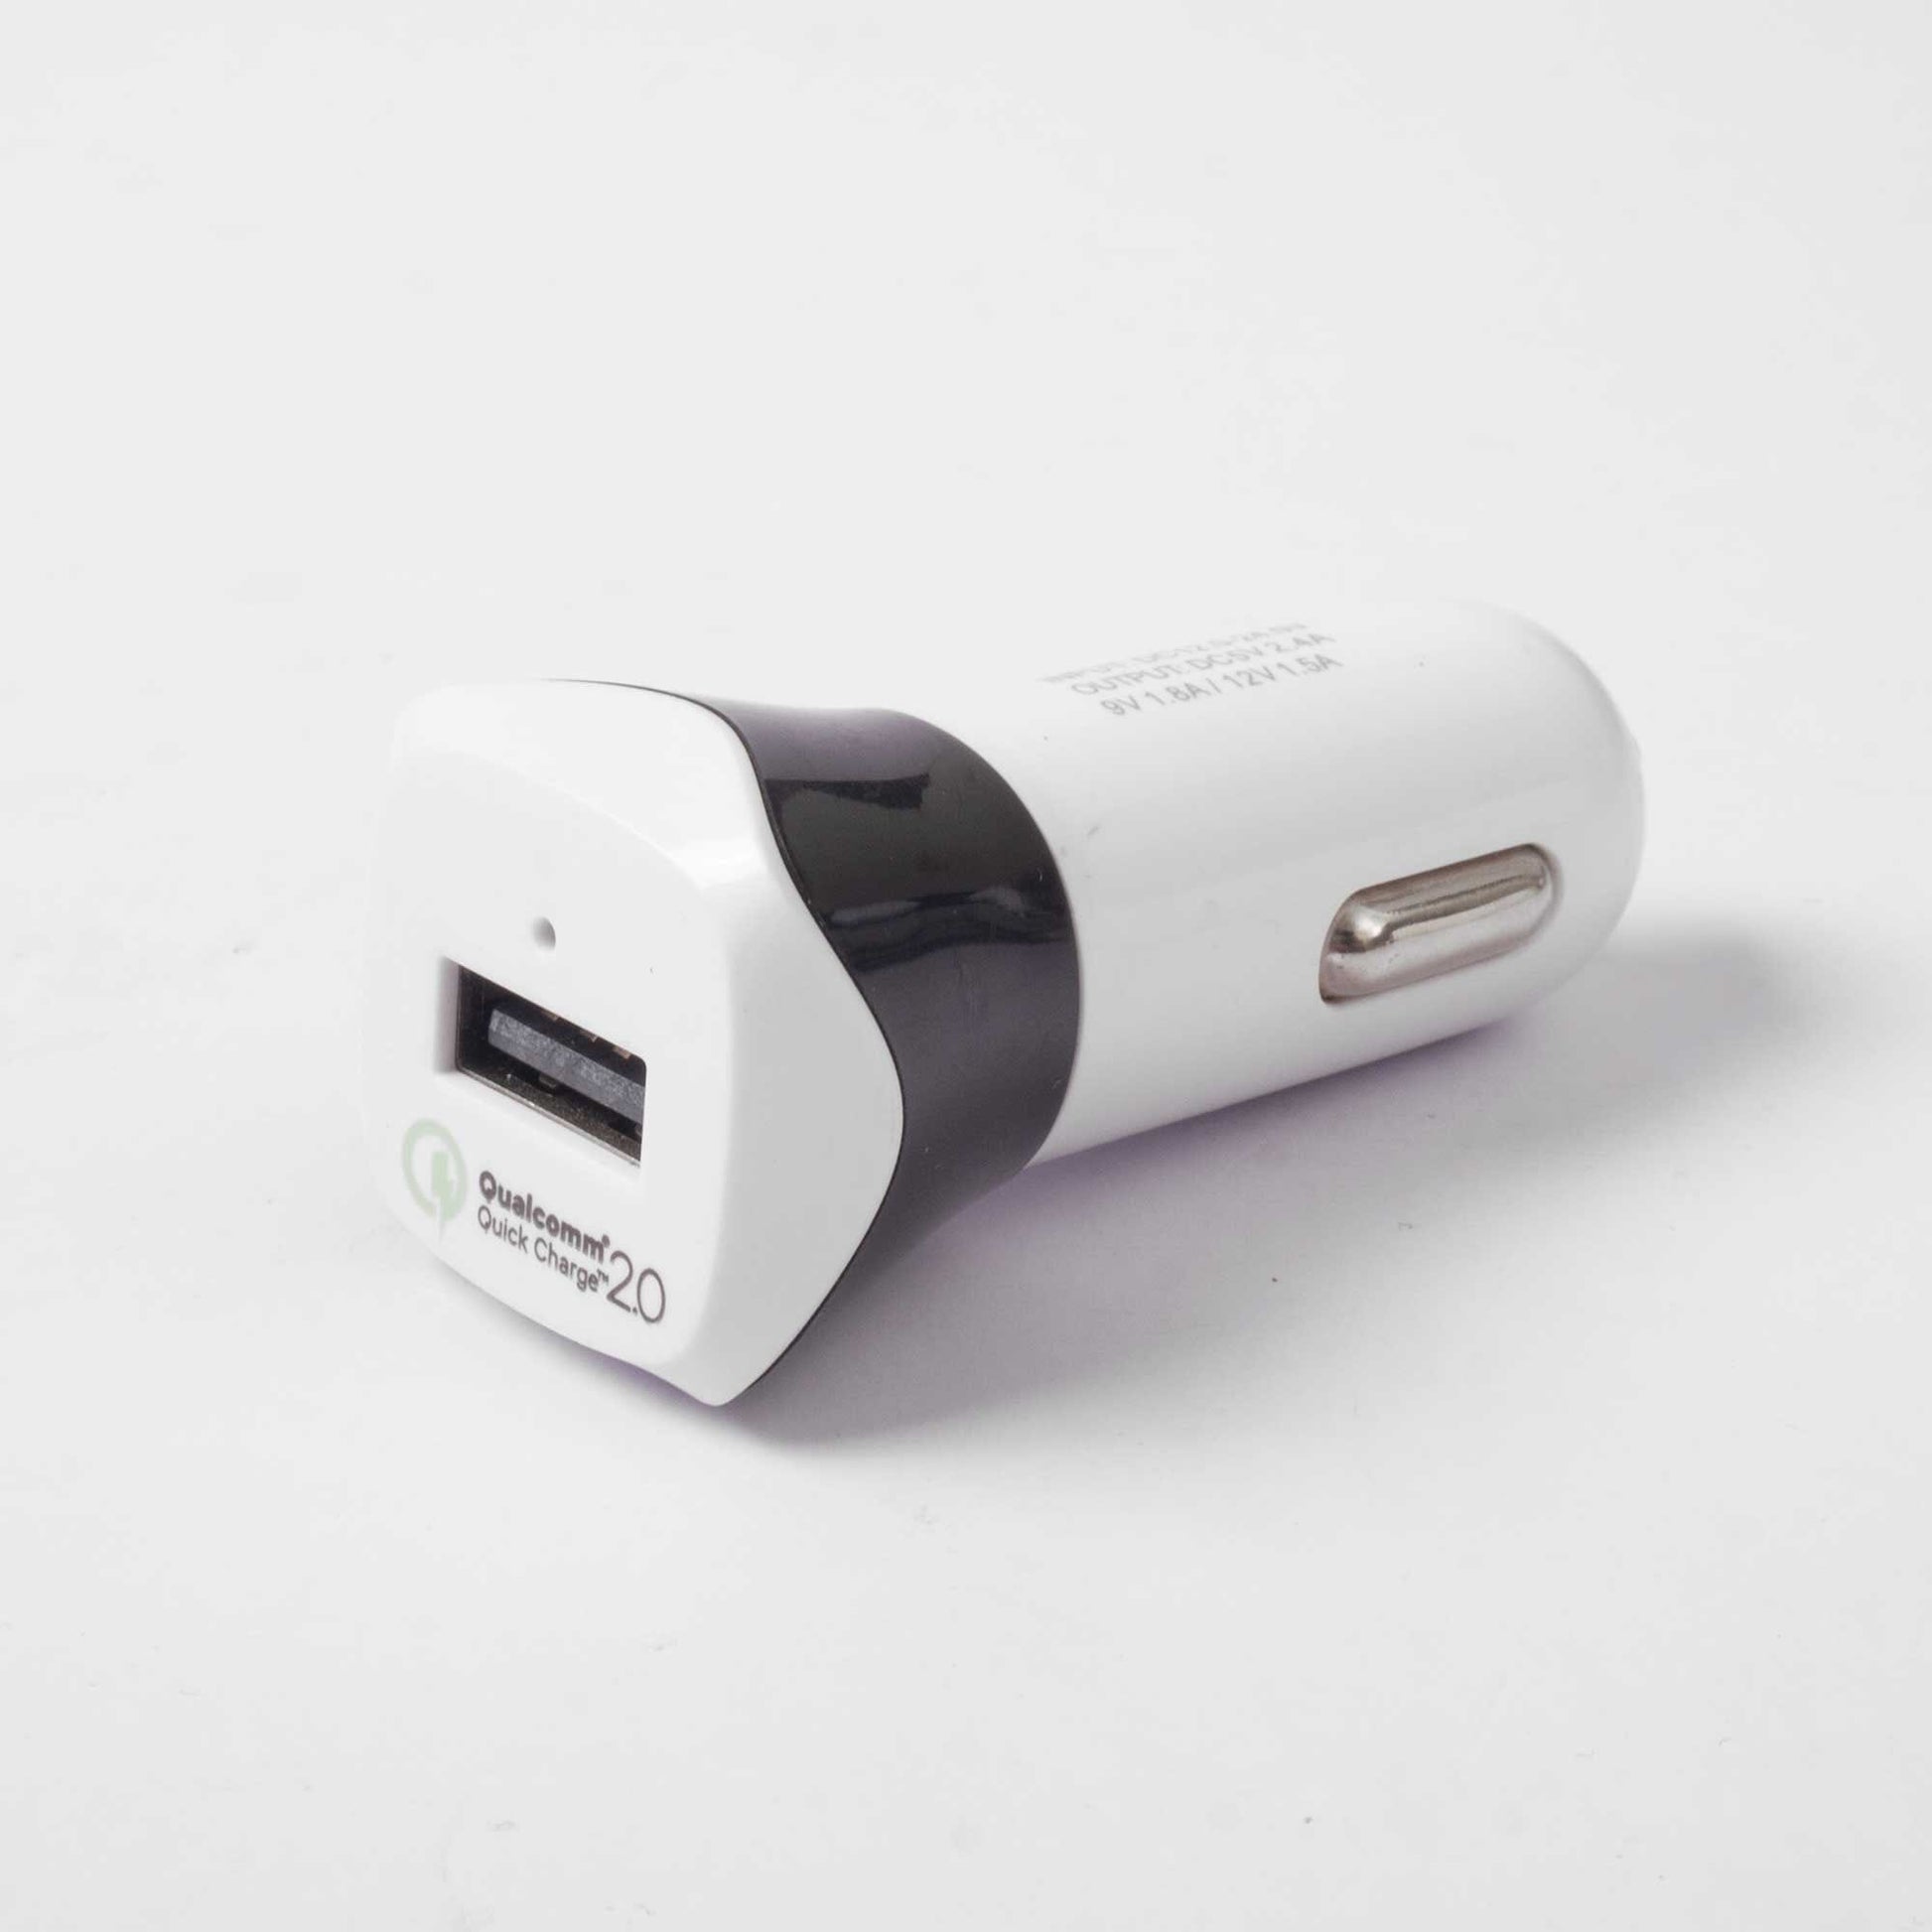 Qualcomm Quick Charge 2.0 USB Car Charger Mobile Accessories SDQ D3 